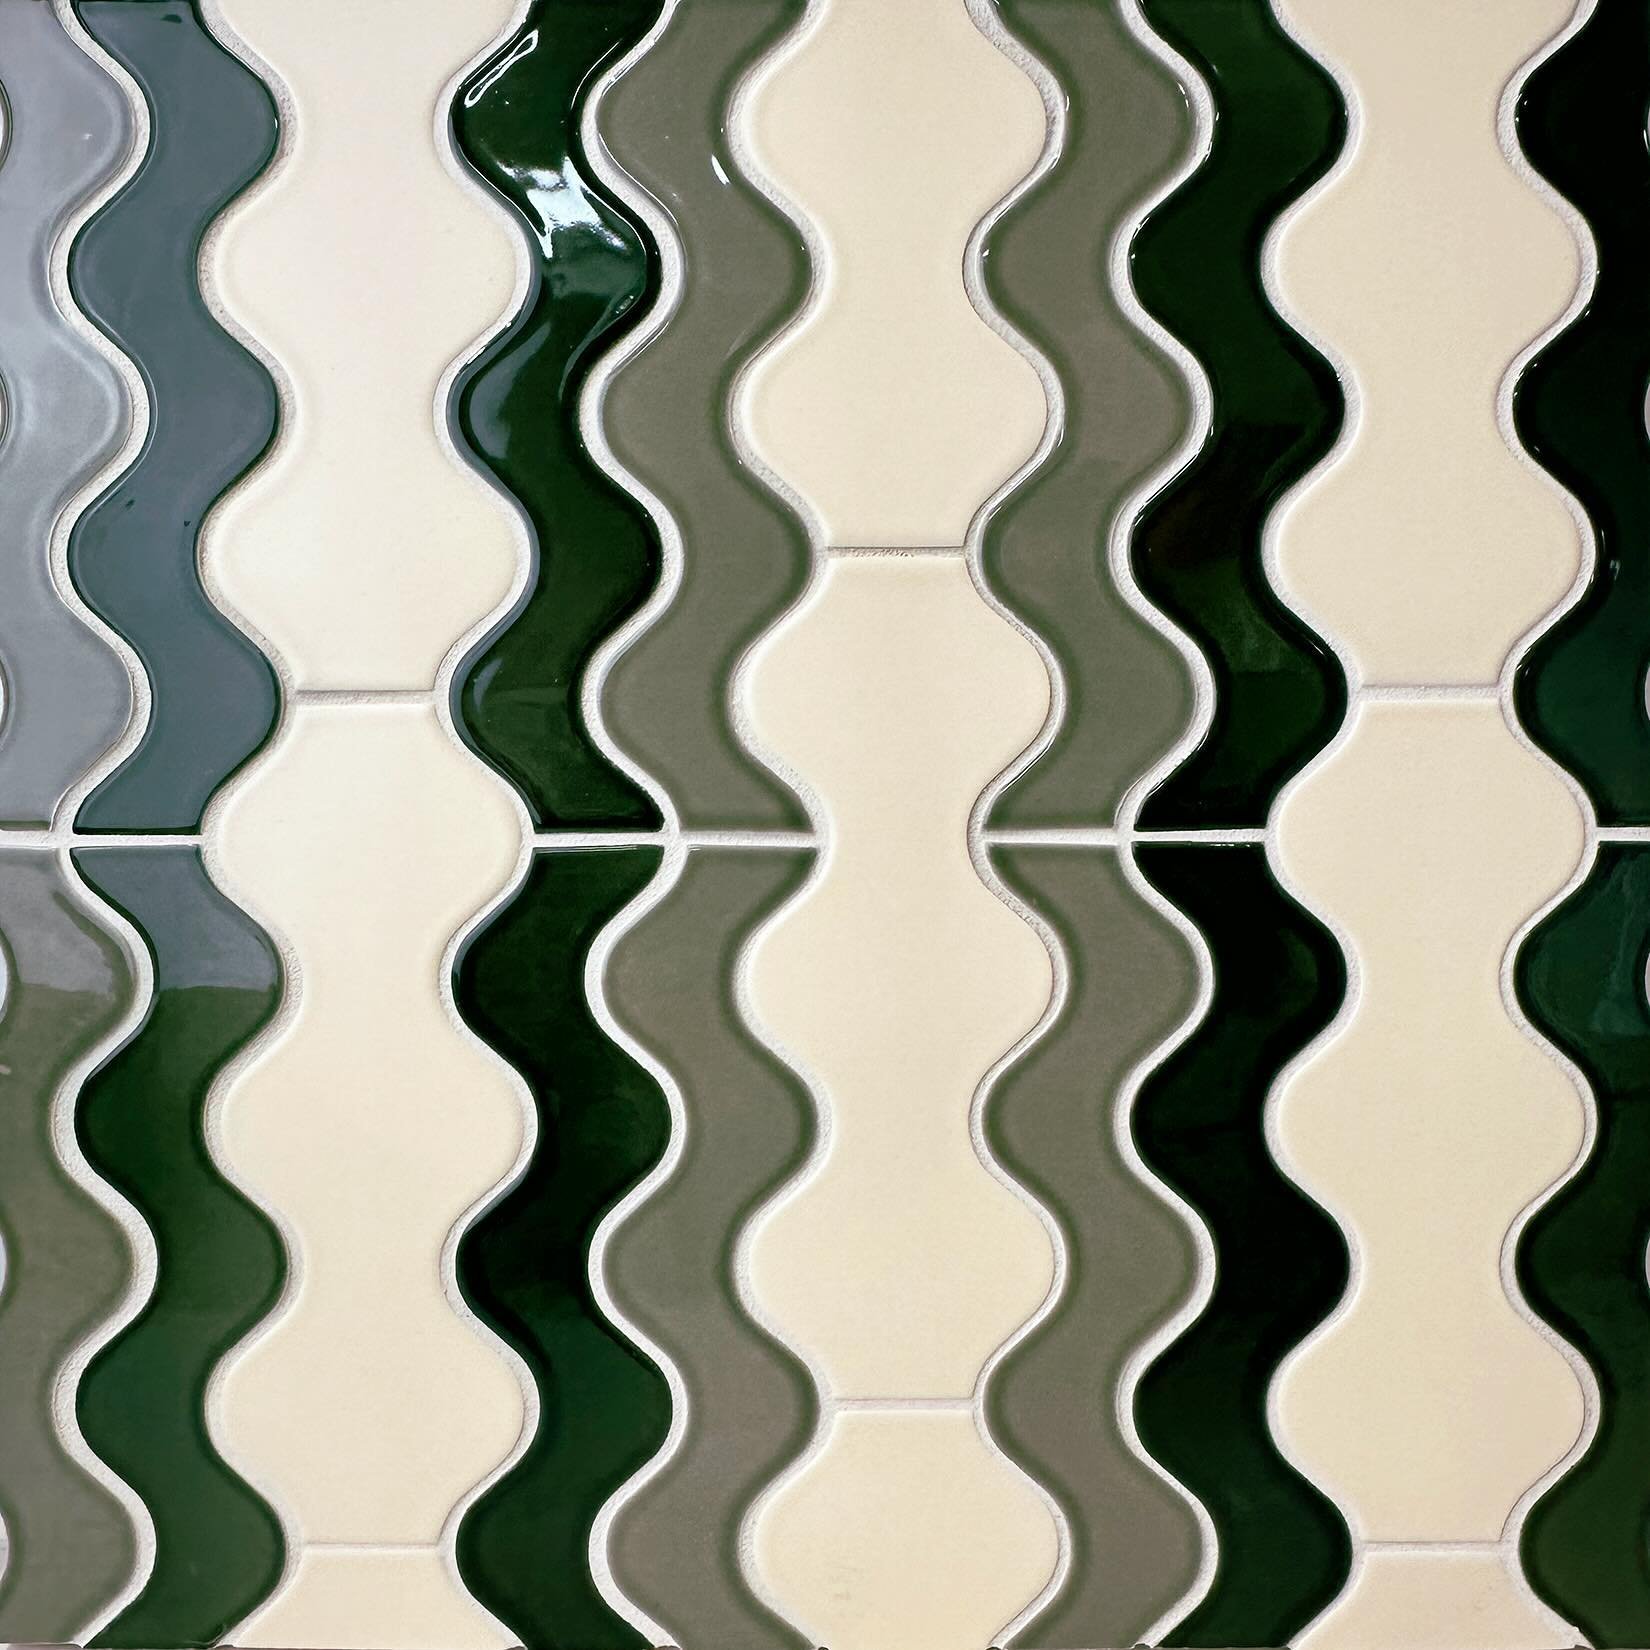 NEW TILE!!!! Undulate Collection hits the site on Friday!! Say buh bye boring tile&hellip;&hellip; #tilelove #cooltile #madewithlove